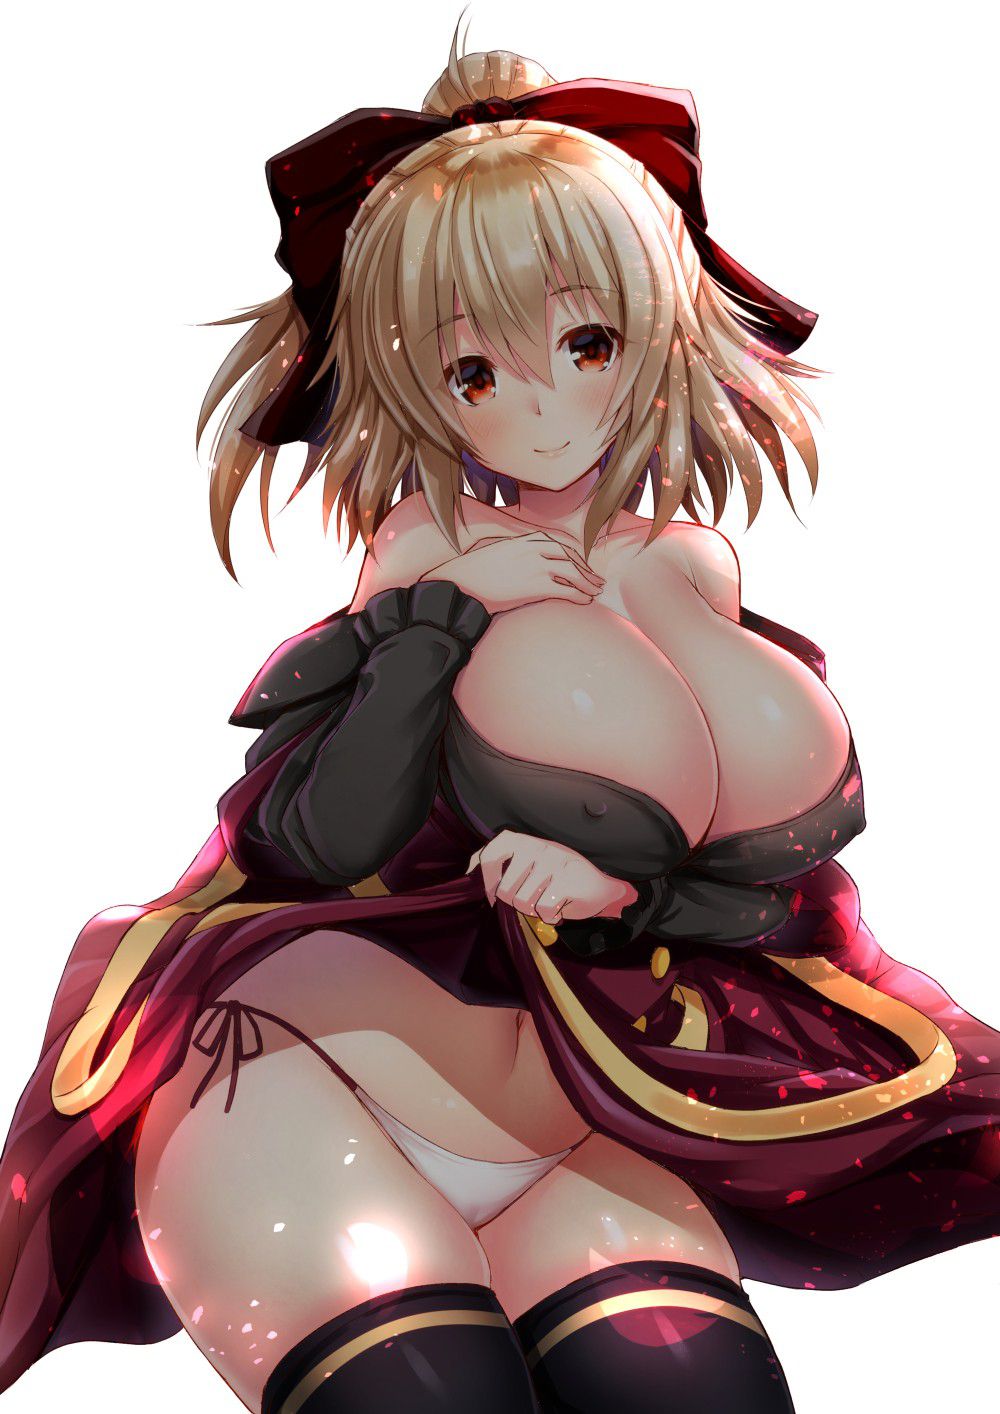 [2nd] Second erotic image of a plump plump girl. 11 [plump] 15